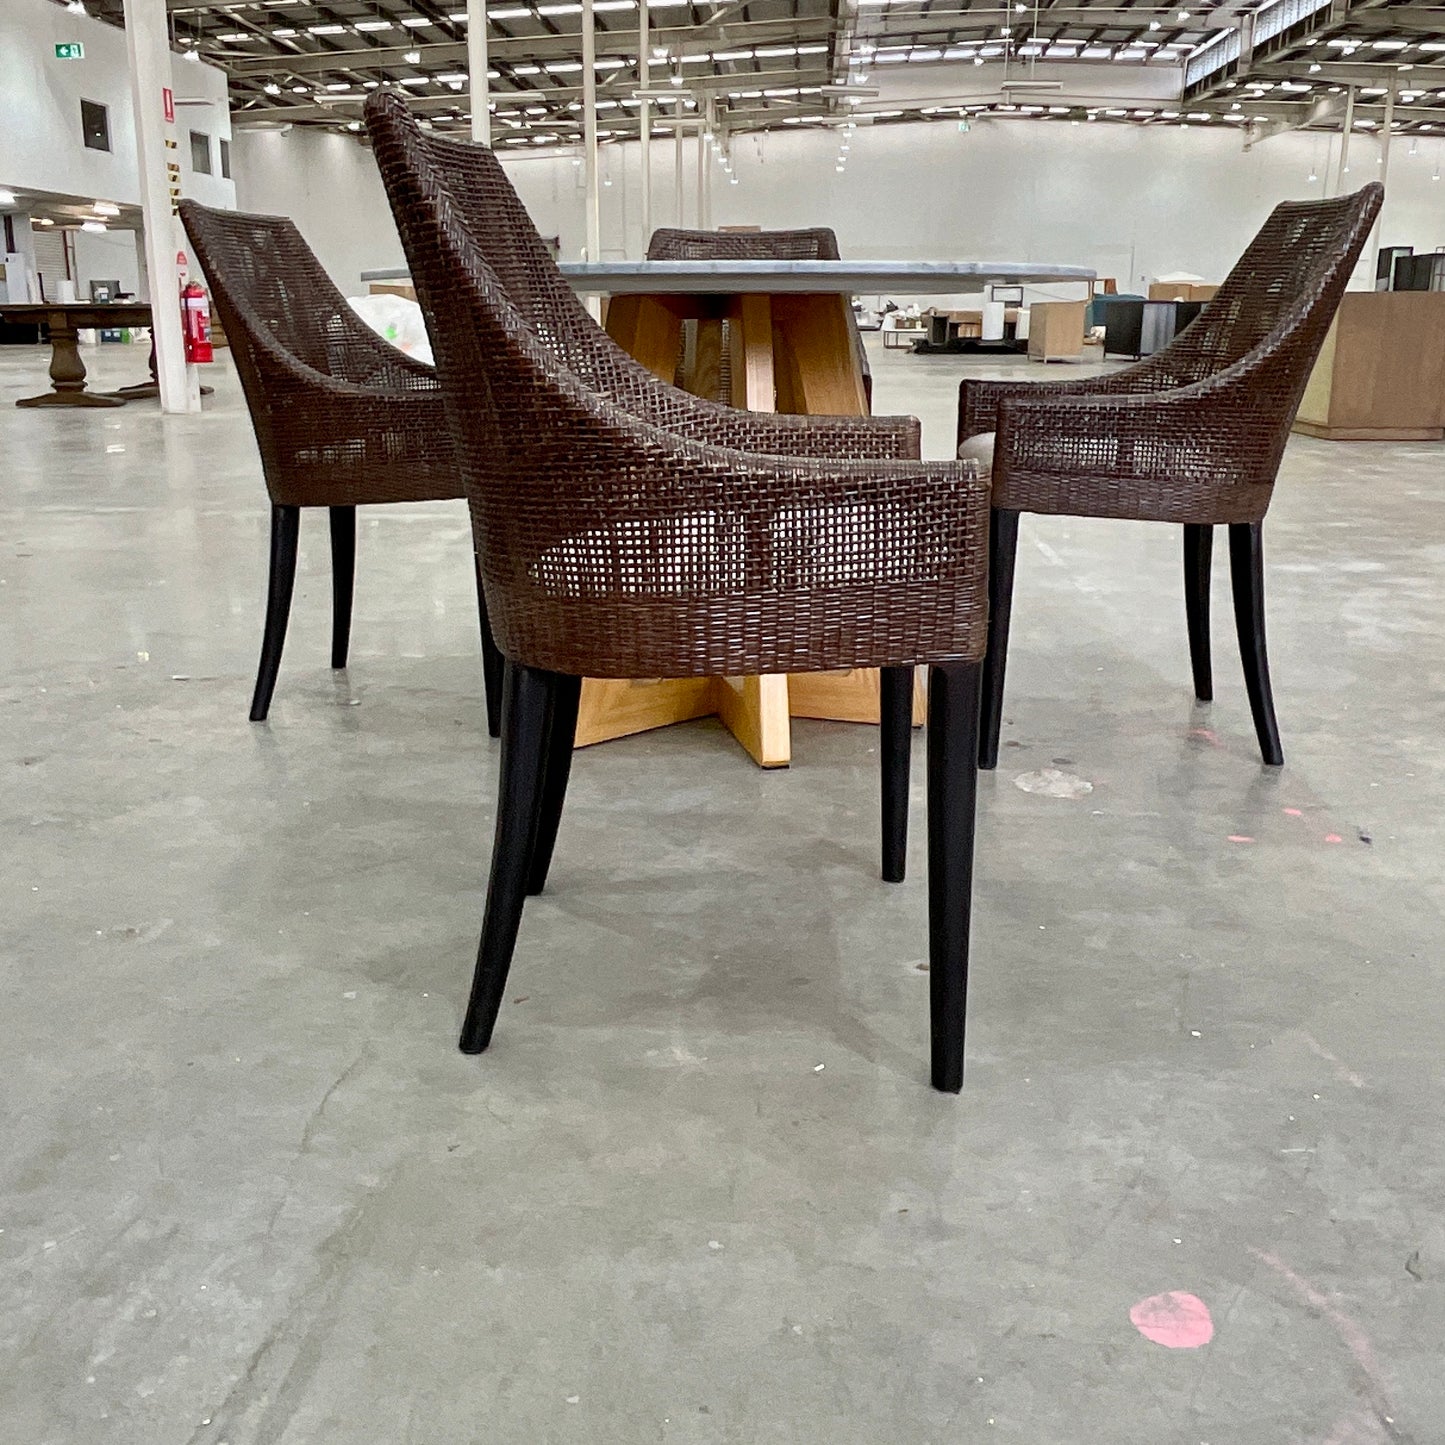 Set of SIX Miami Dining Chairs in Chocolate by Coco Republic